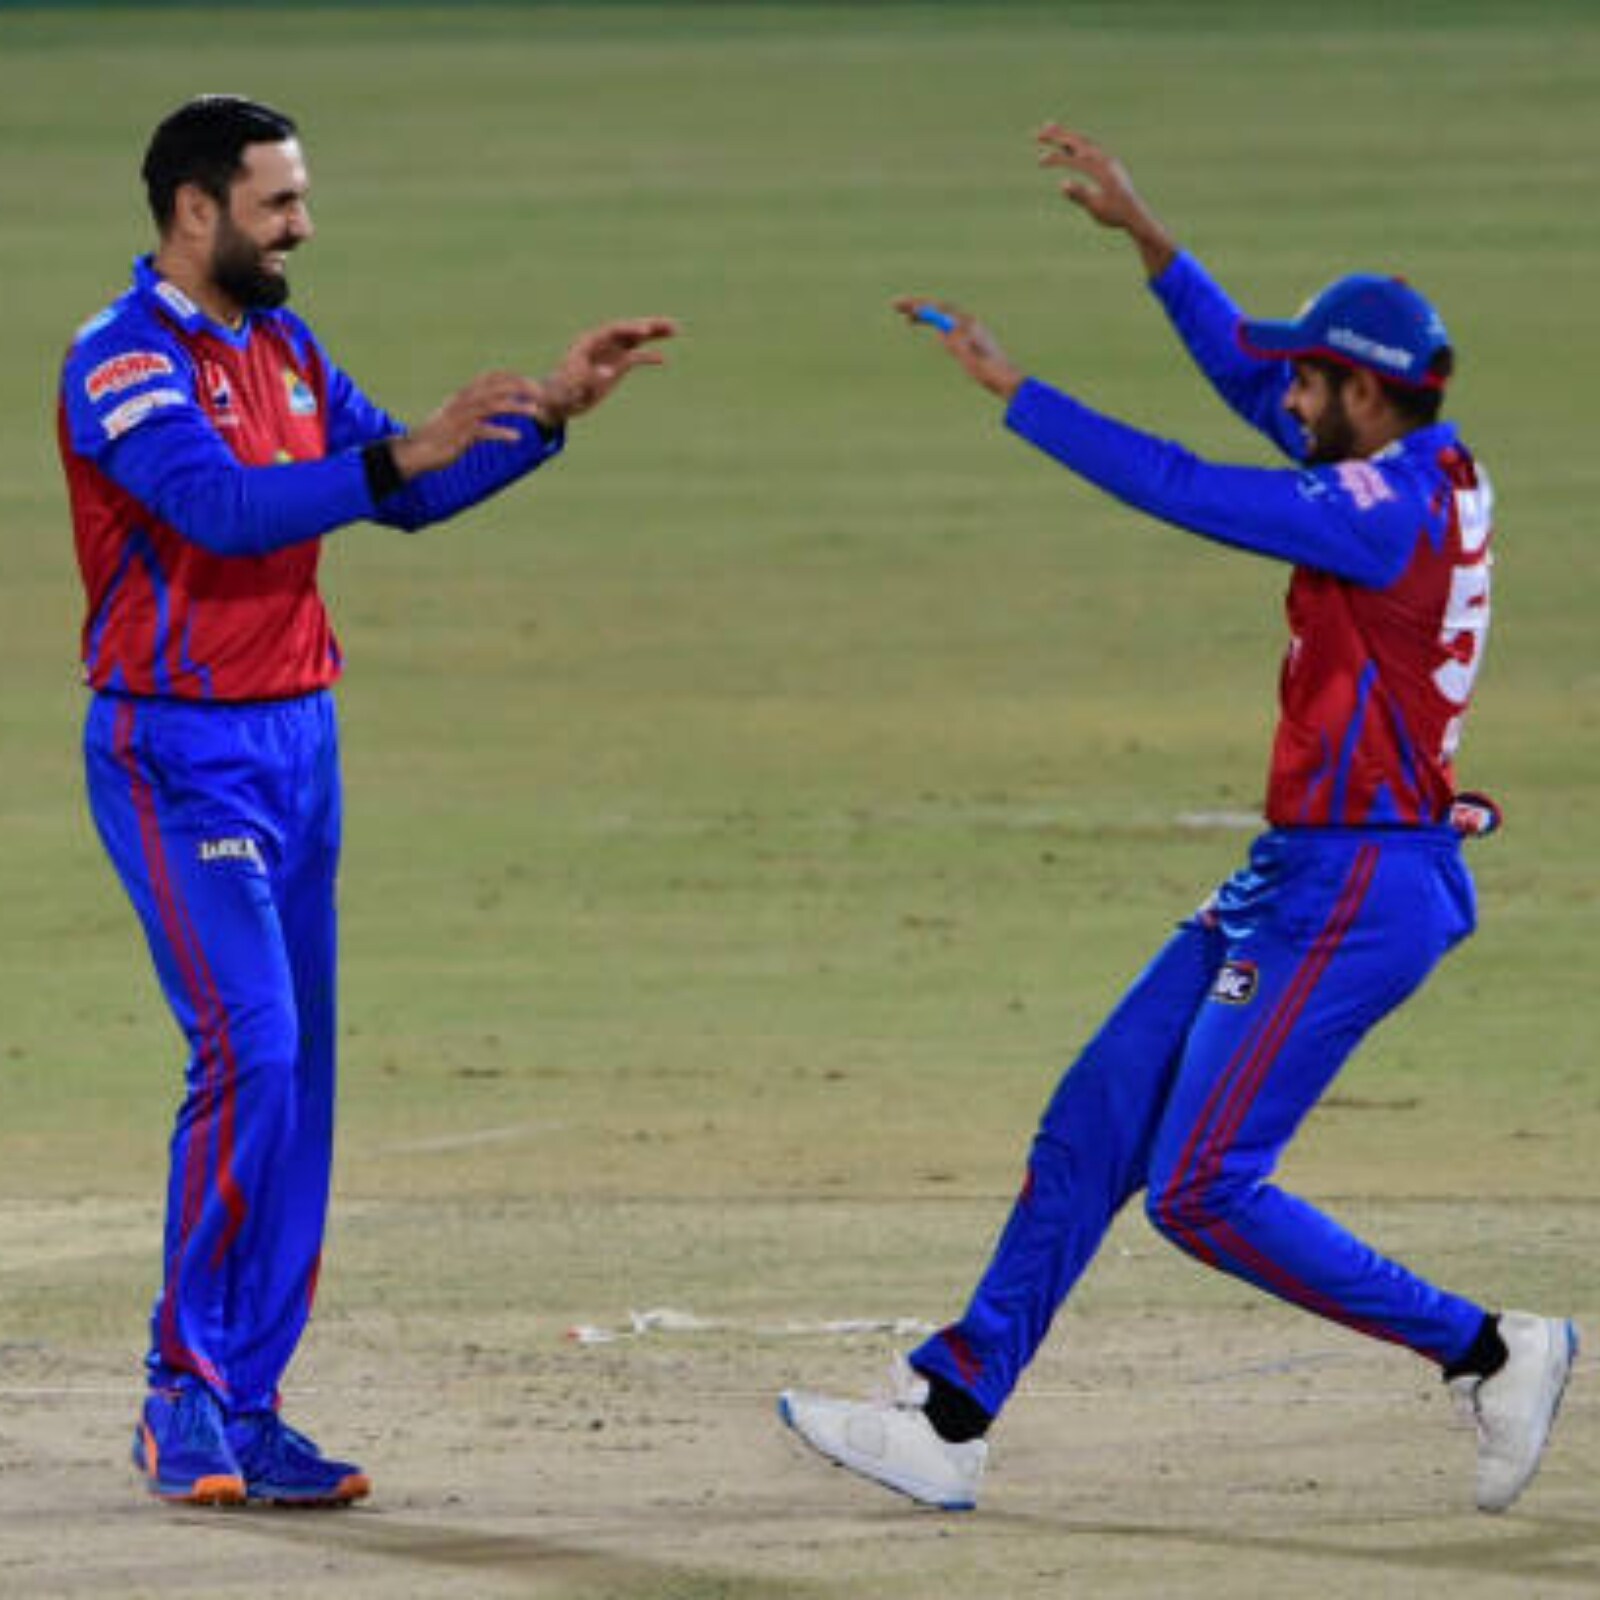 Pakistan Super League 2022 Live Streaming When And Where to Watch Lahore Qalandars vs Karachi Kings Online And on TV in India